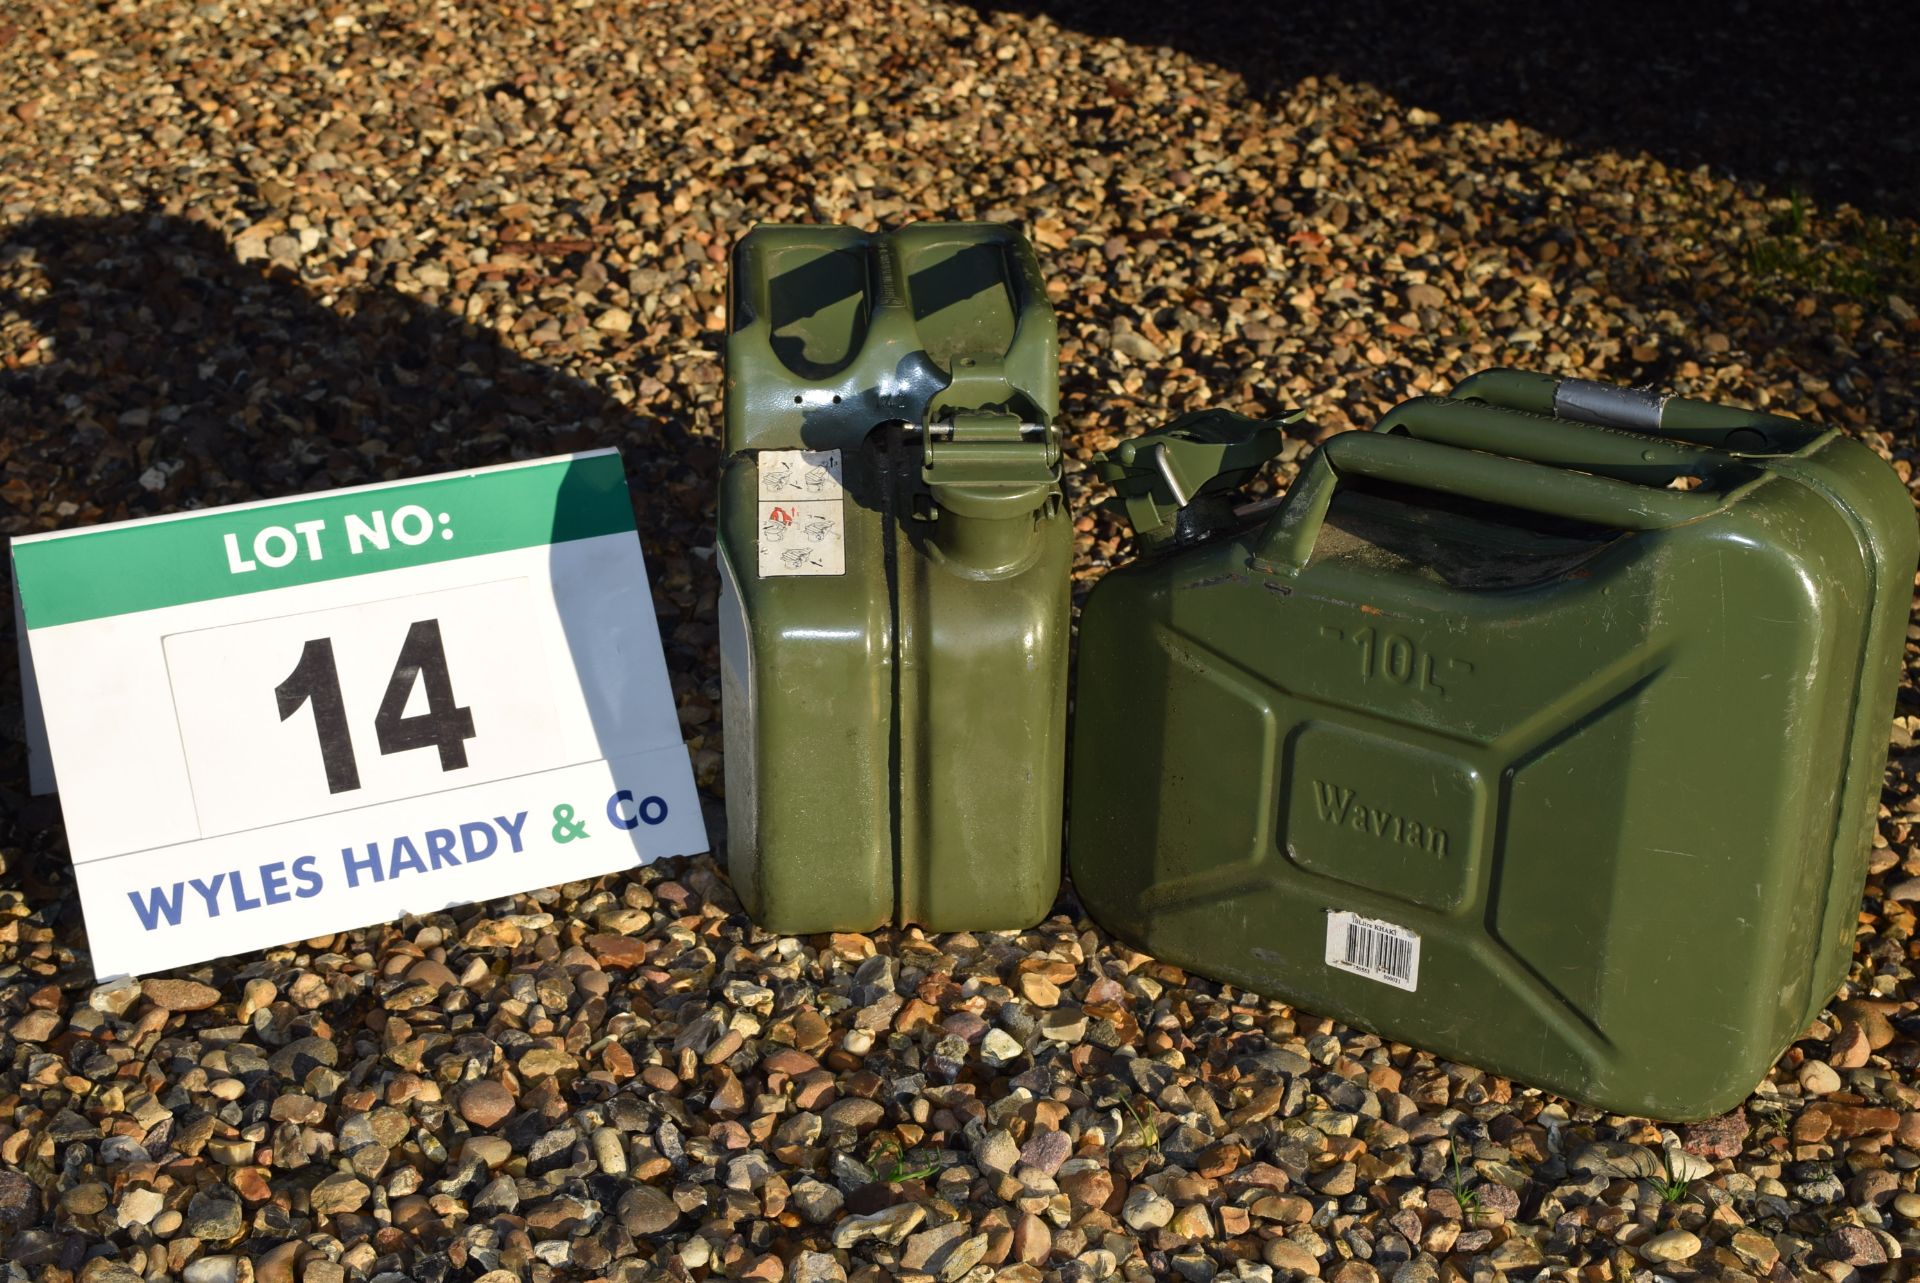 Two WAVIAN 10-Litre capacity Jerry Cans